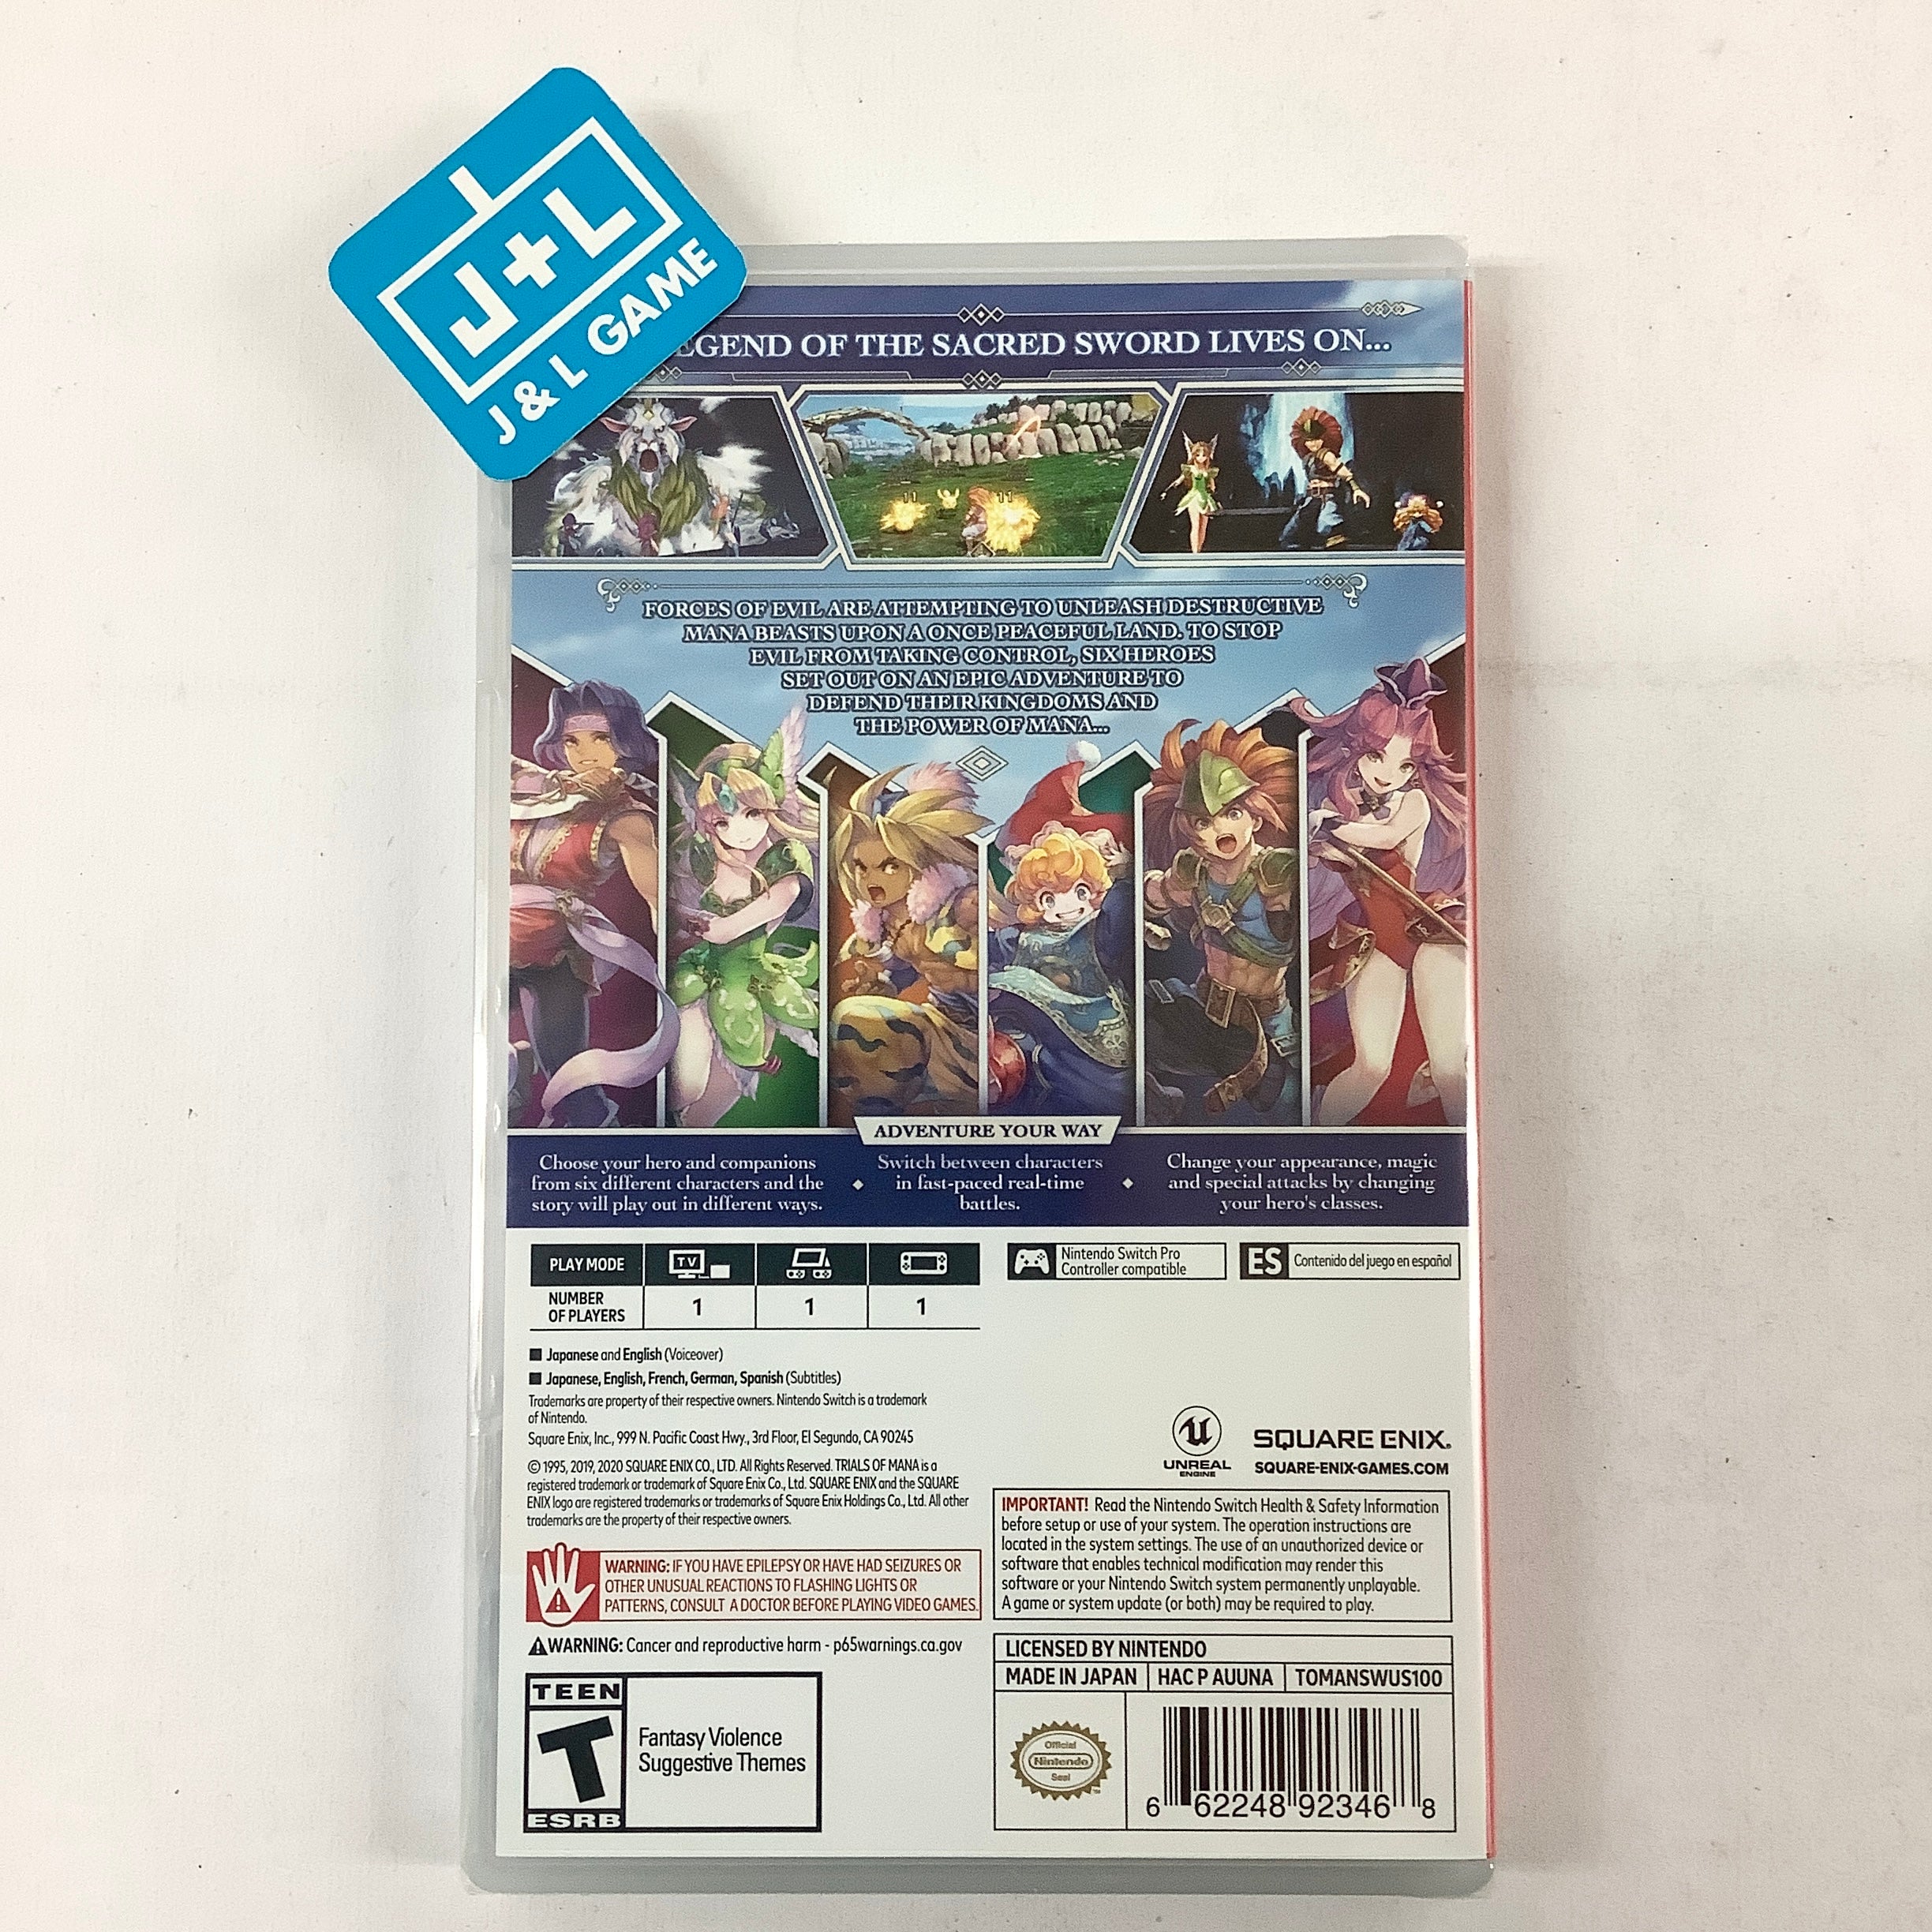 Trials of Mana - (NSW) Nintendo Switch Video Games Square Enix   